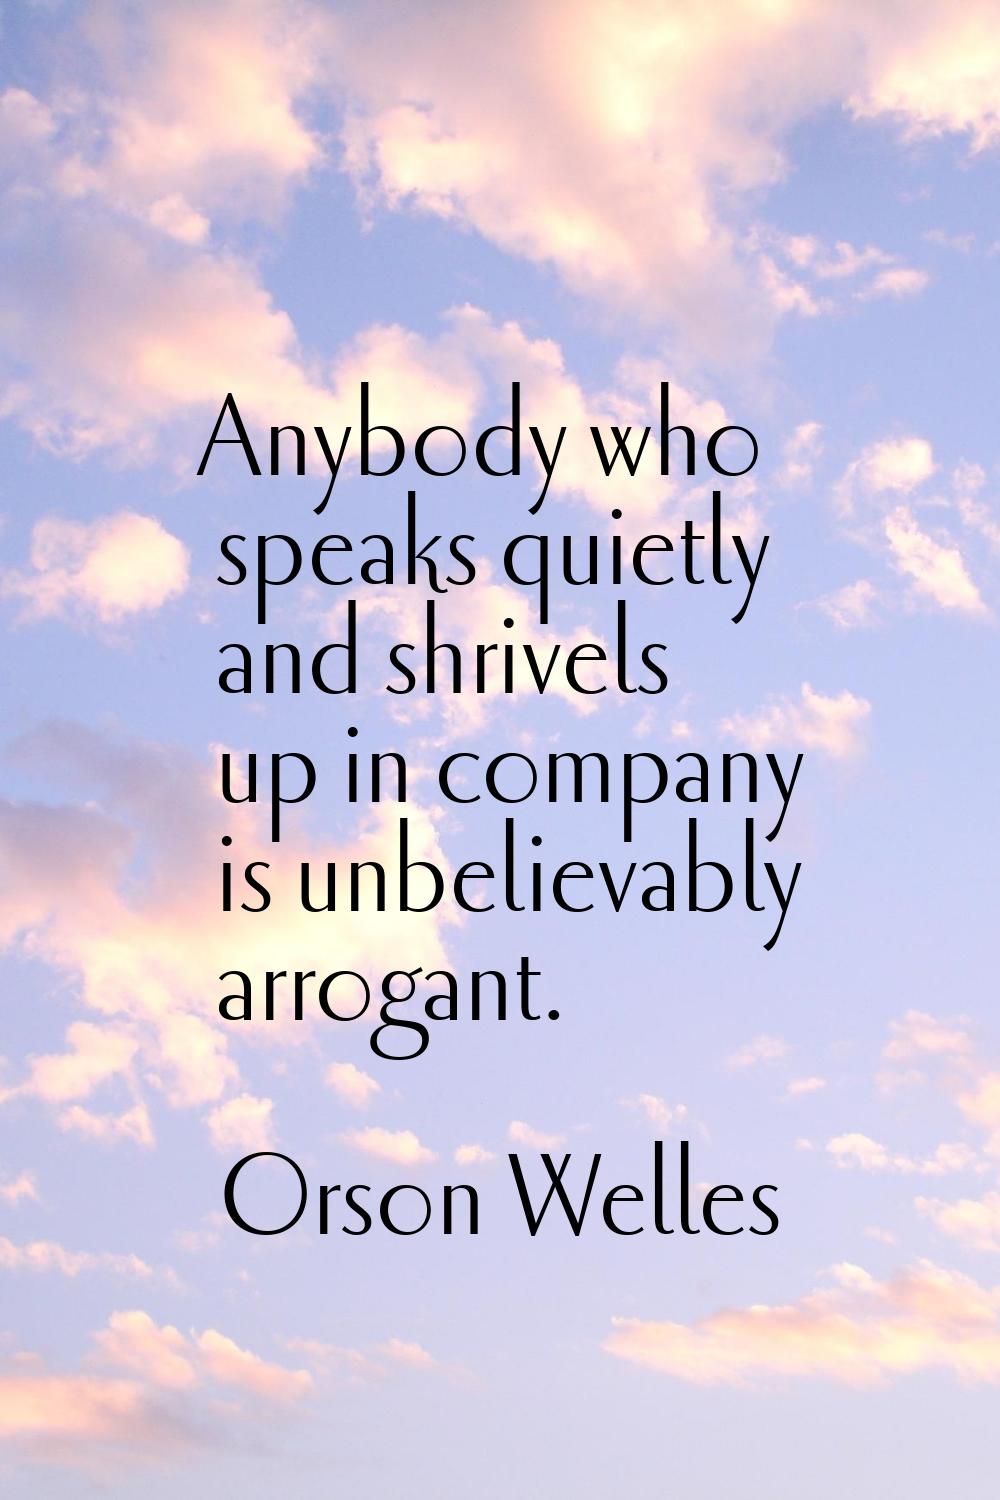 Anybody who speaks quietly and shrivels up in company is unbelievably arrogant.